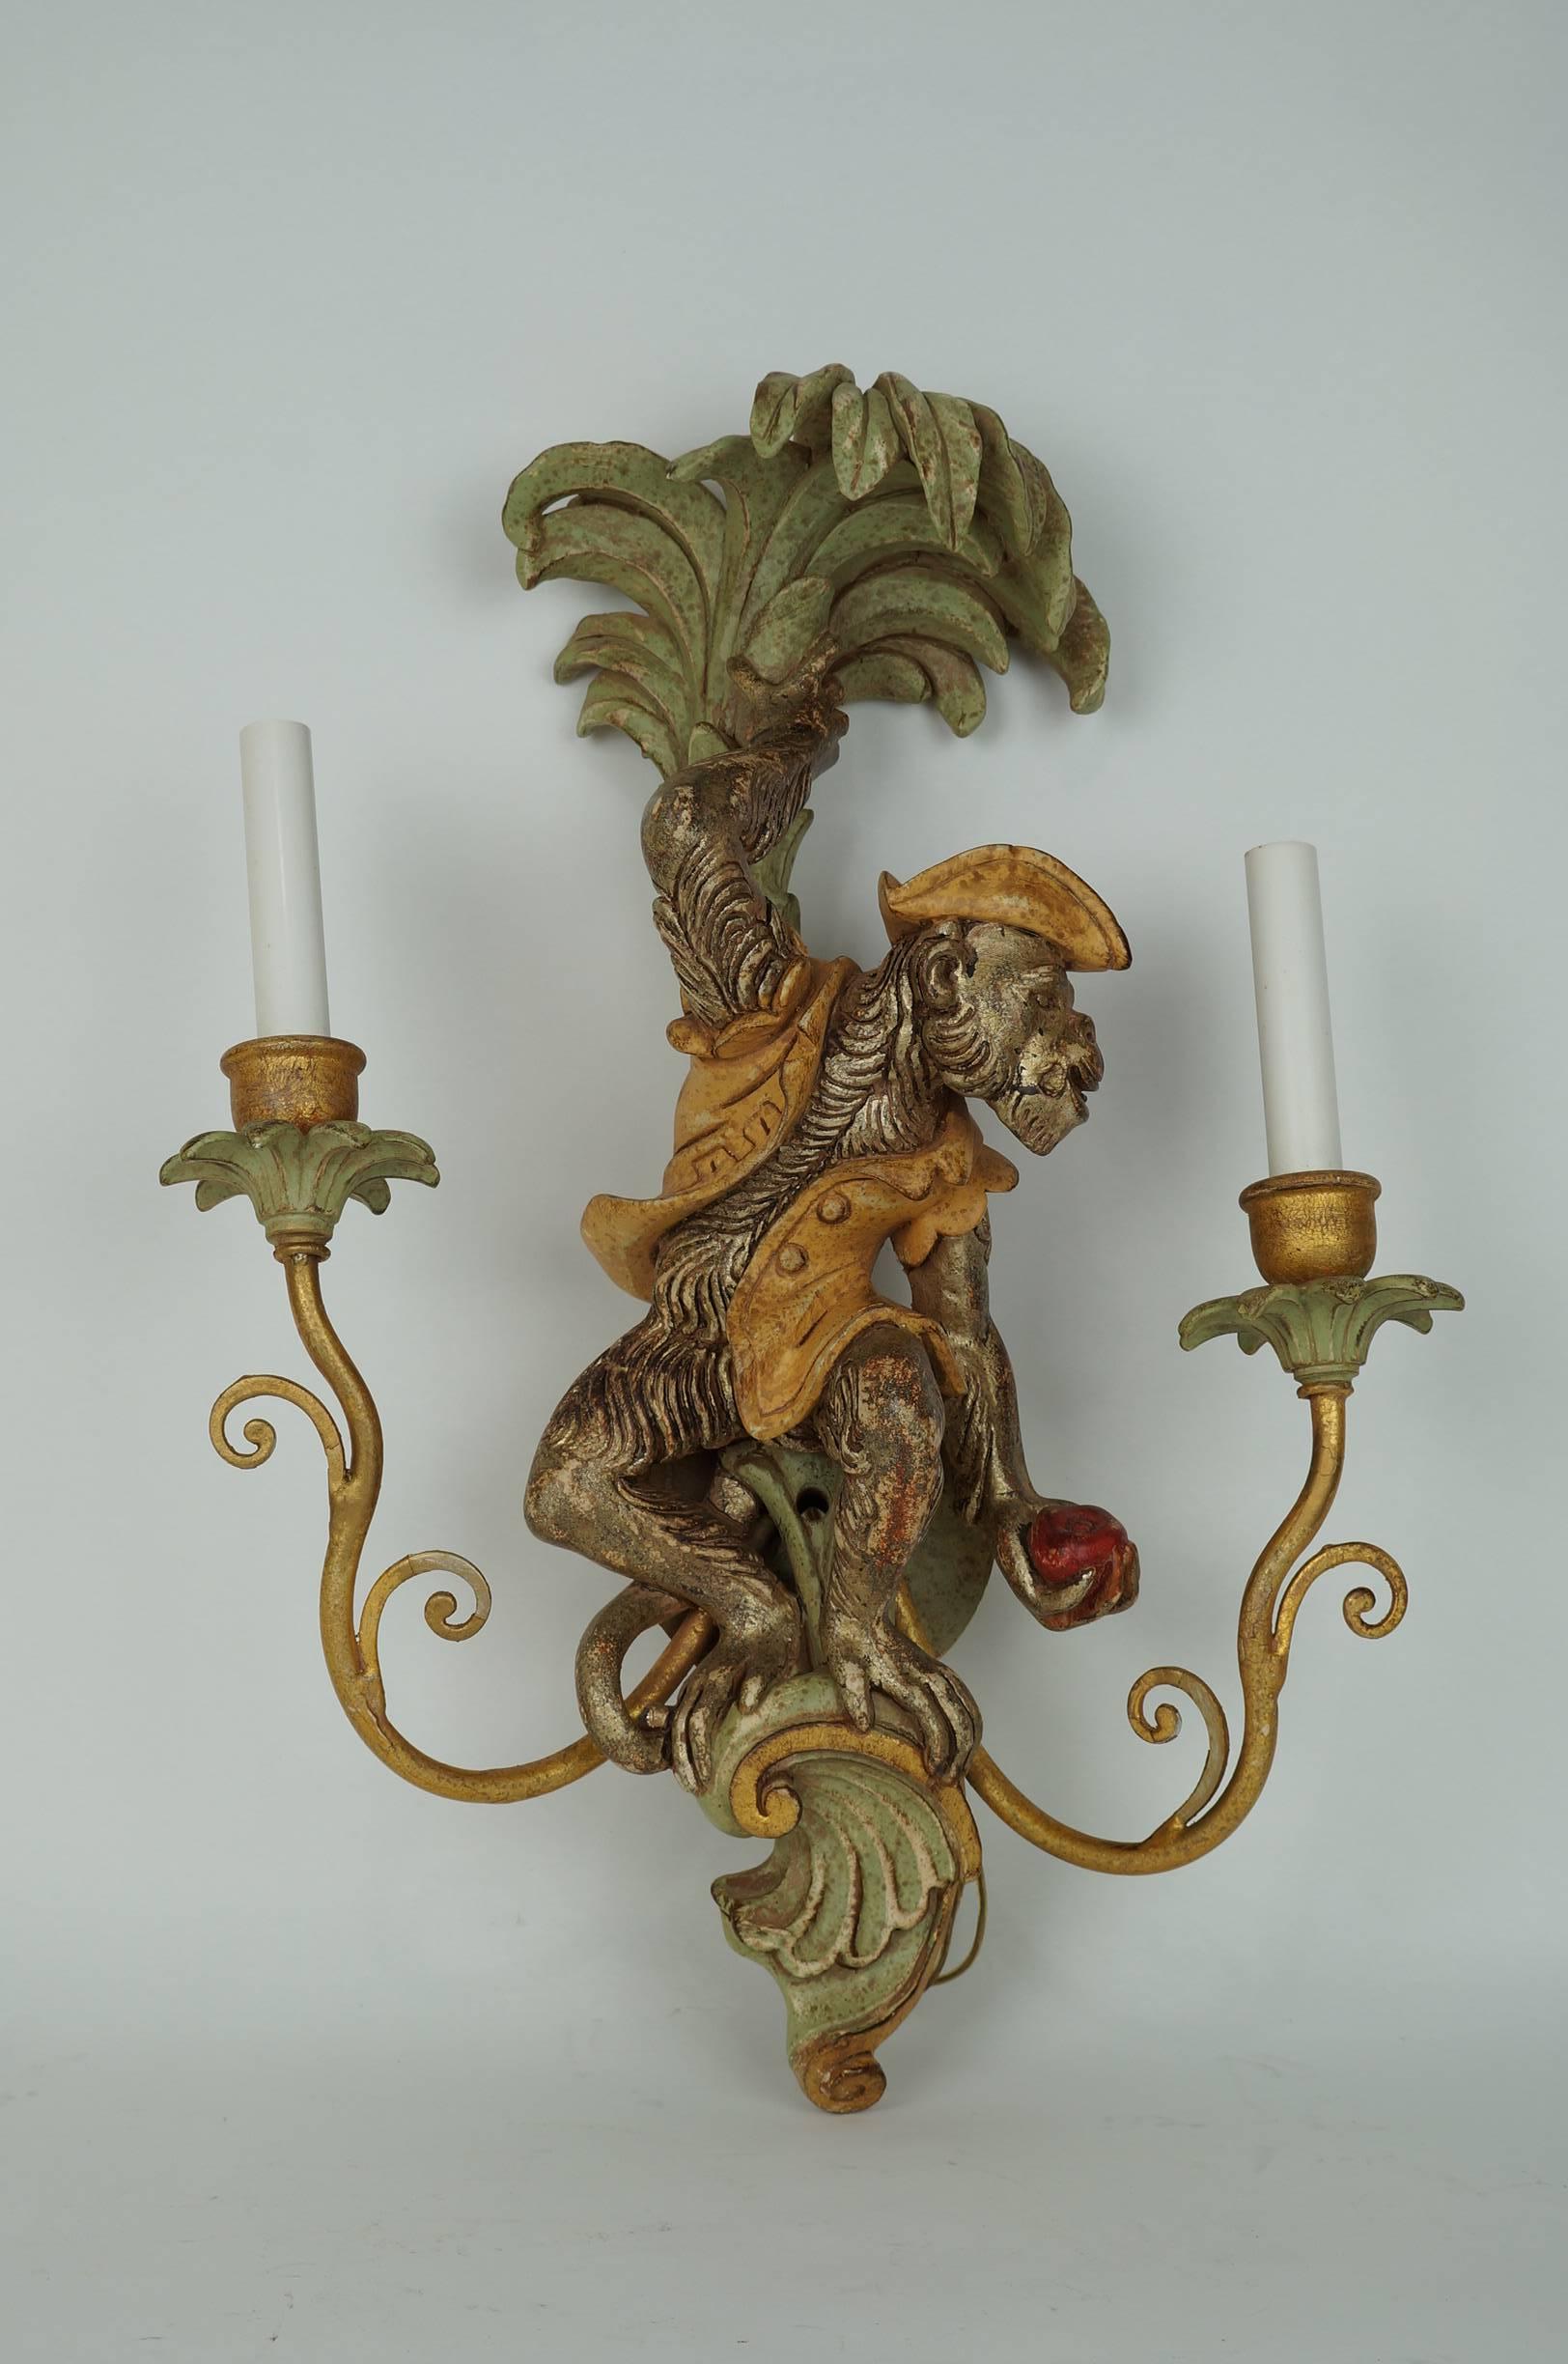 Pair of 2 Arm Wall Light Sconces with Monkey Figures
Stock Number: LS19